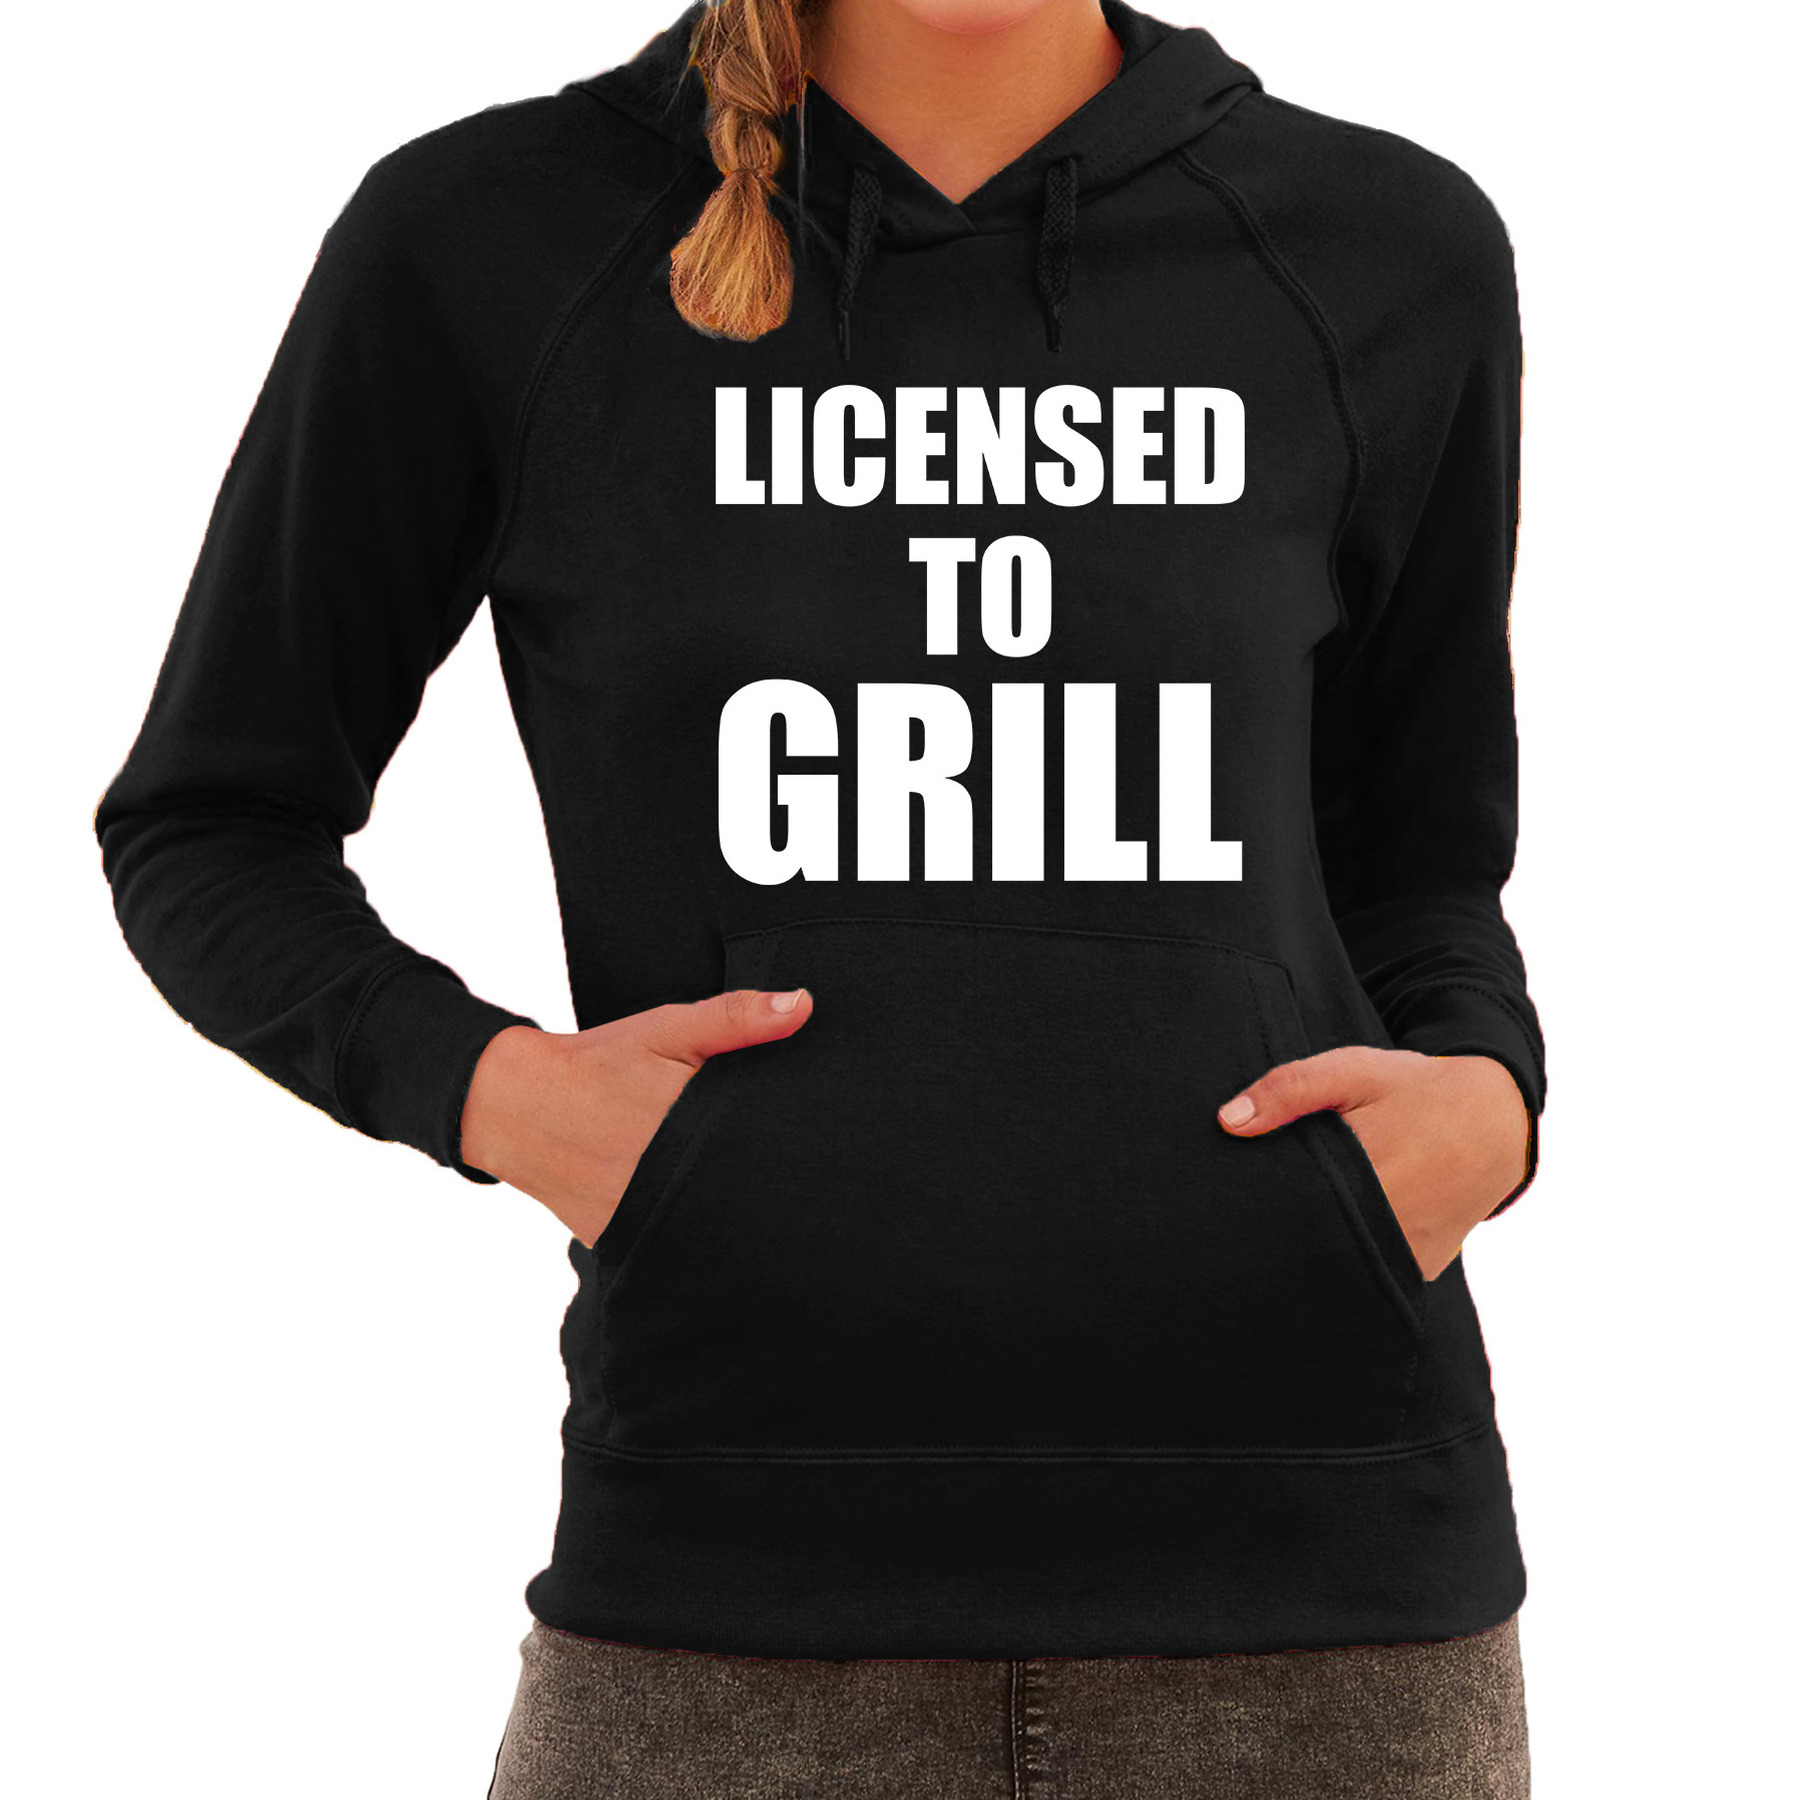 Barbecue cadeau hoodie Licensed to grill zwart voor dames bbq hooded sweater